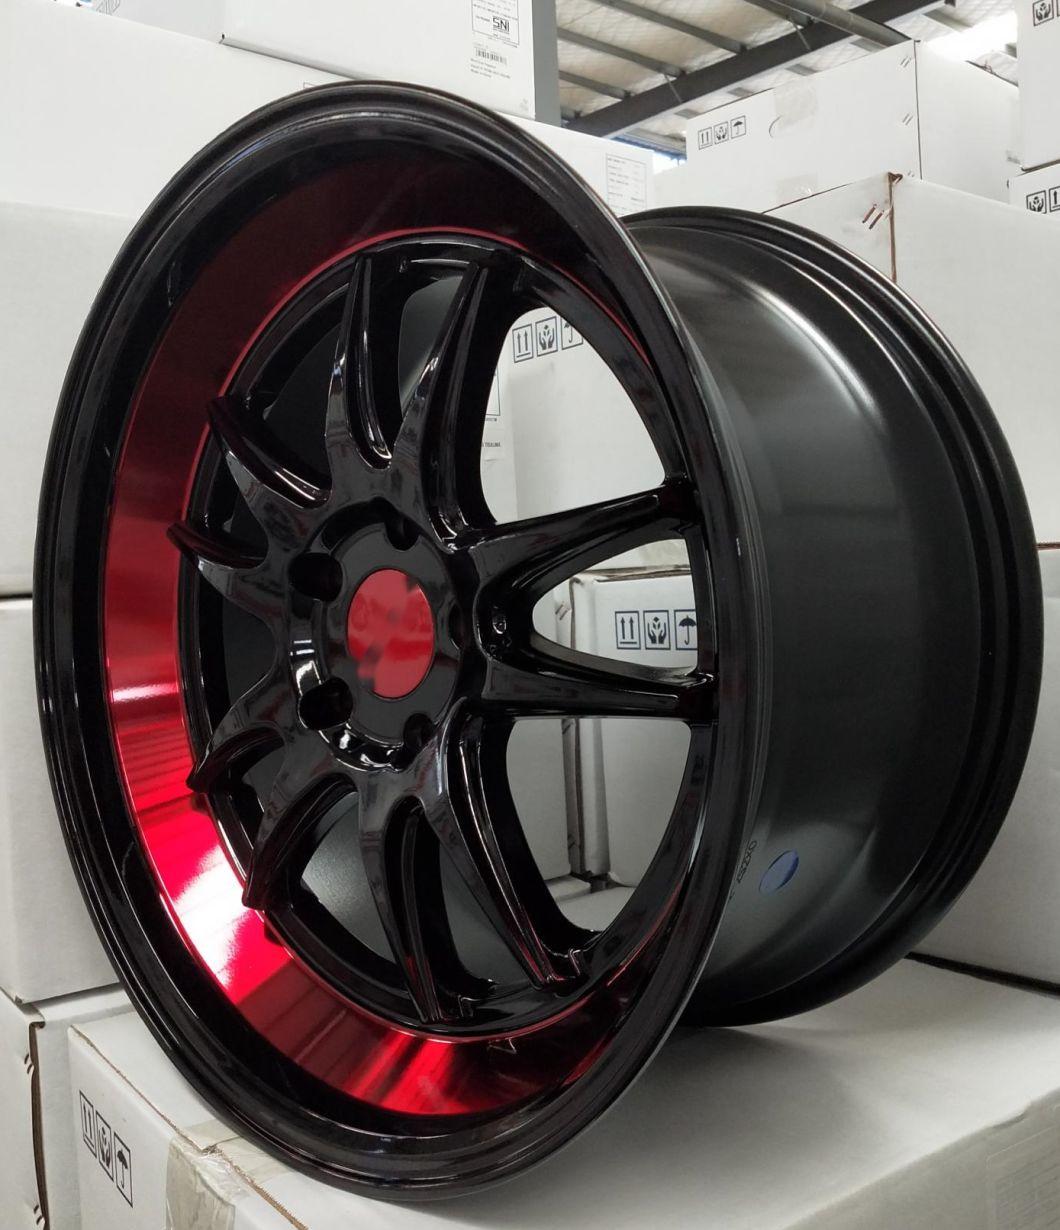 18X8.5 18X9.5 Inch Alloy Wheel with Et 38-42/20-40 PCD 5X100/114.3 Passenger Car Tires OEM/ODM/Customized Replica Wheels